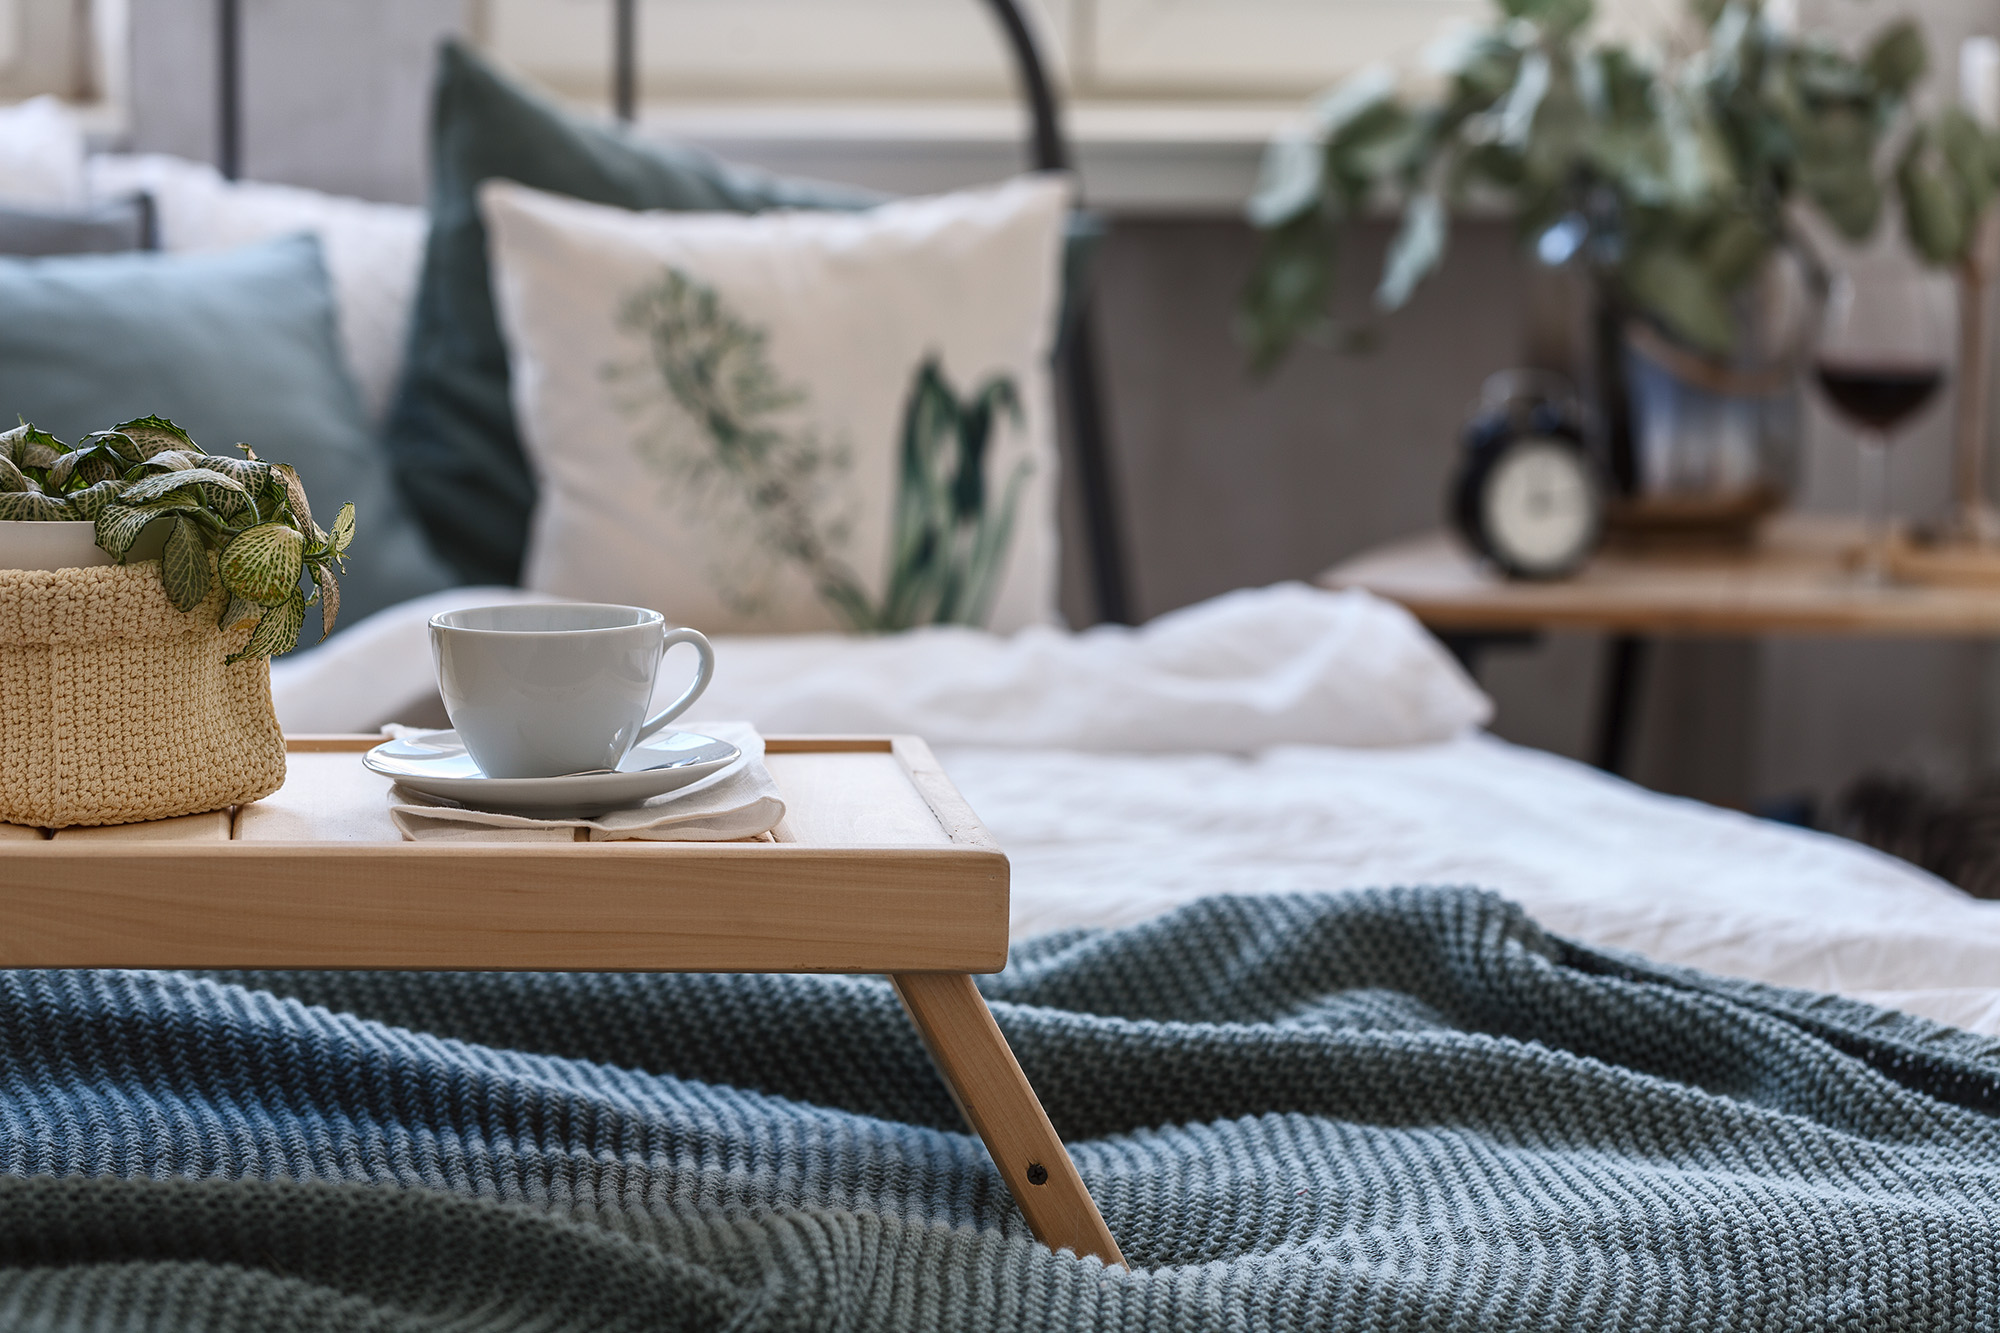 coffee on breakfast tray on bed